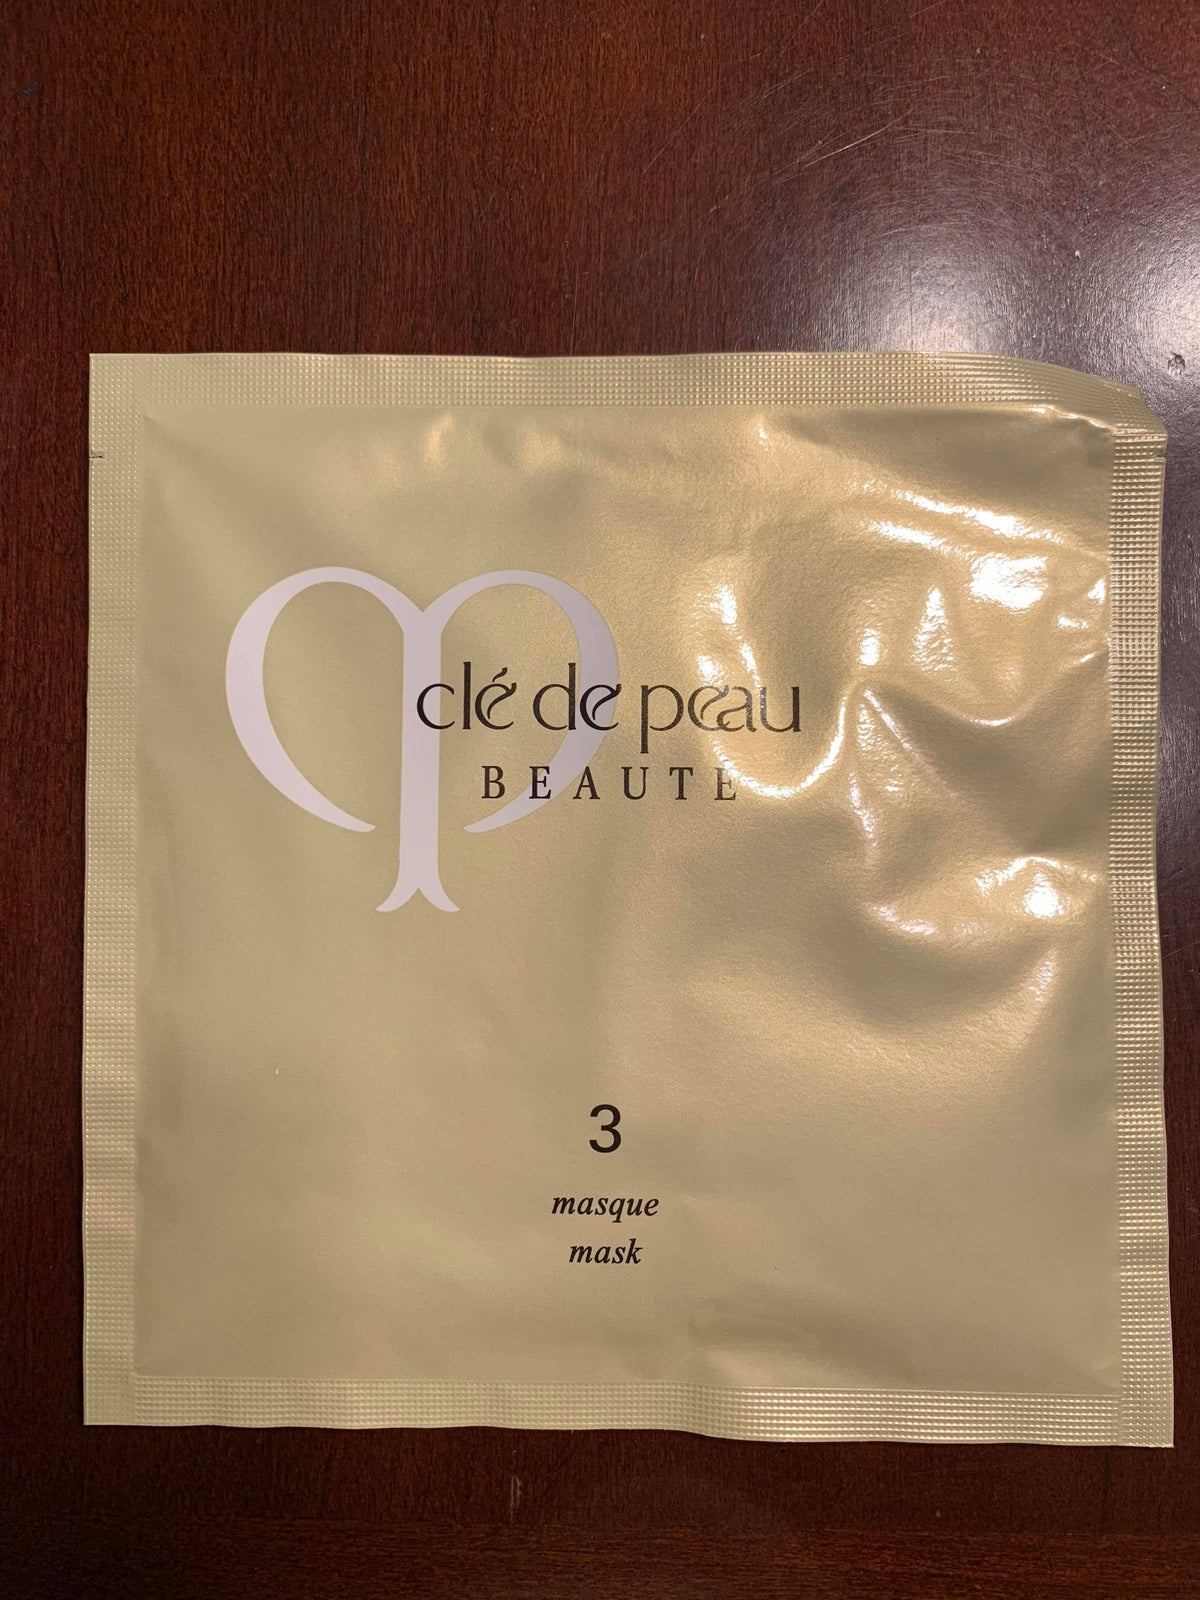 Japan Airlines 777 First Class Cle De Peau Illumenating Concentrate Masks